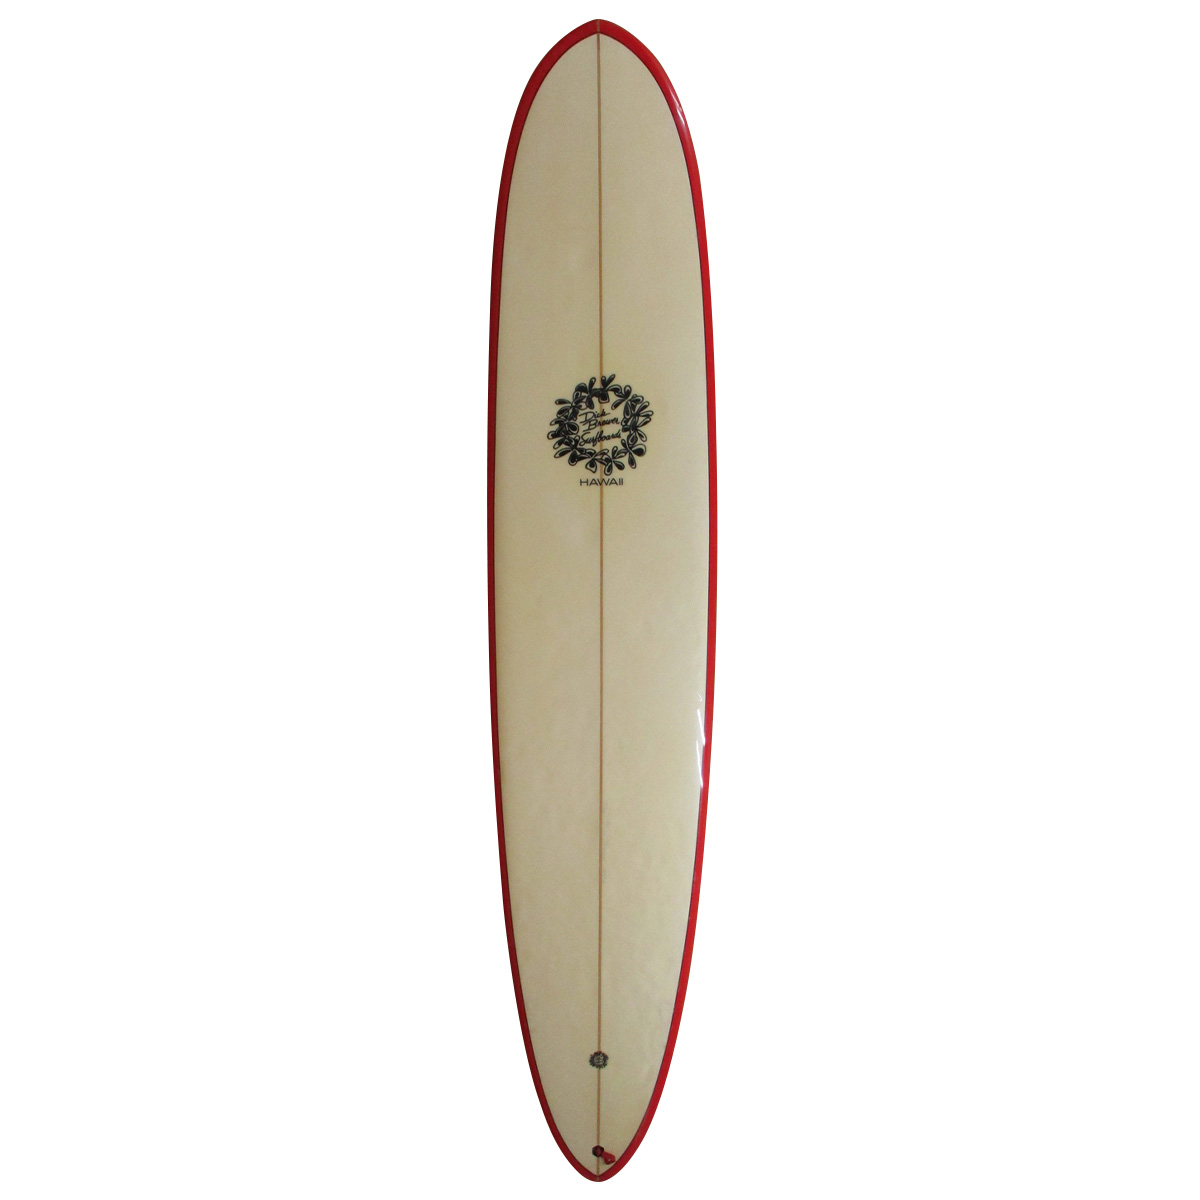 DICK BREWER / ALLROUND 9`0 Shaped by DICK BREWER | USED SURF×SURF 